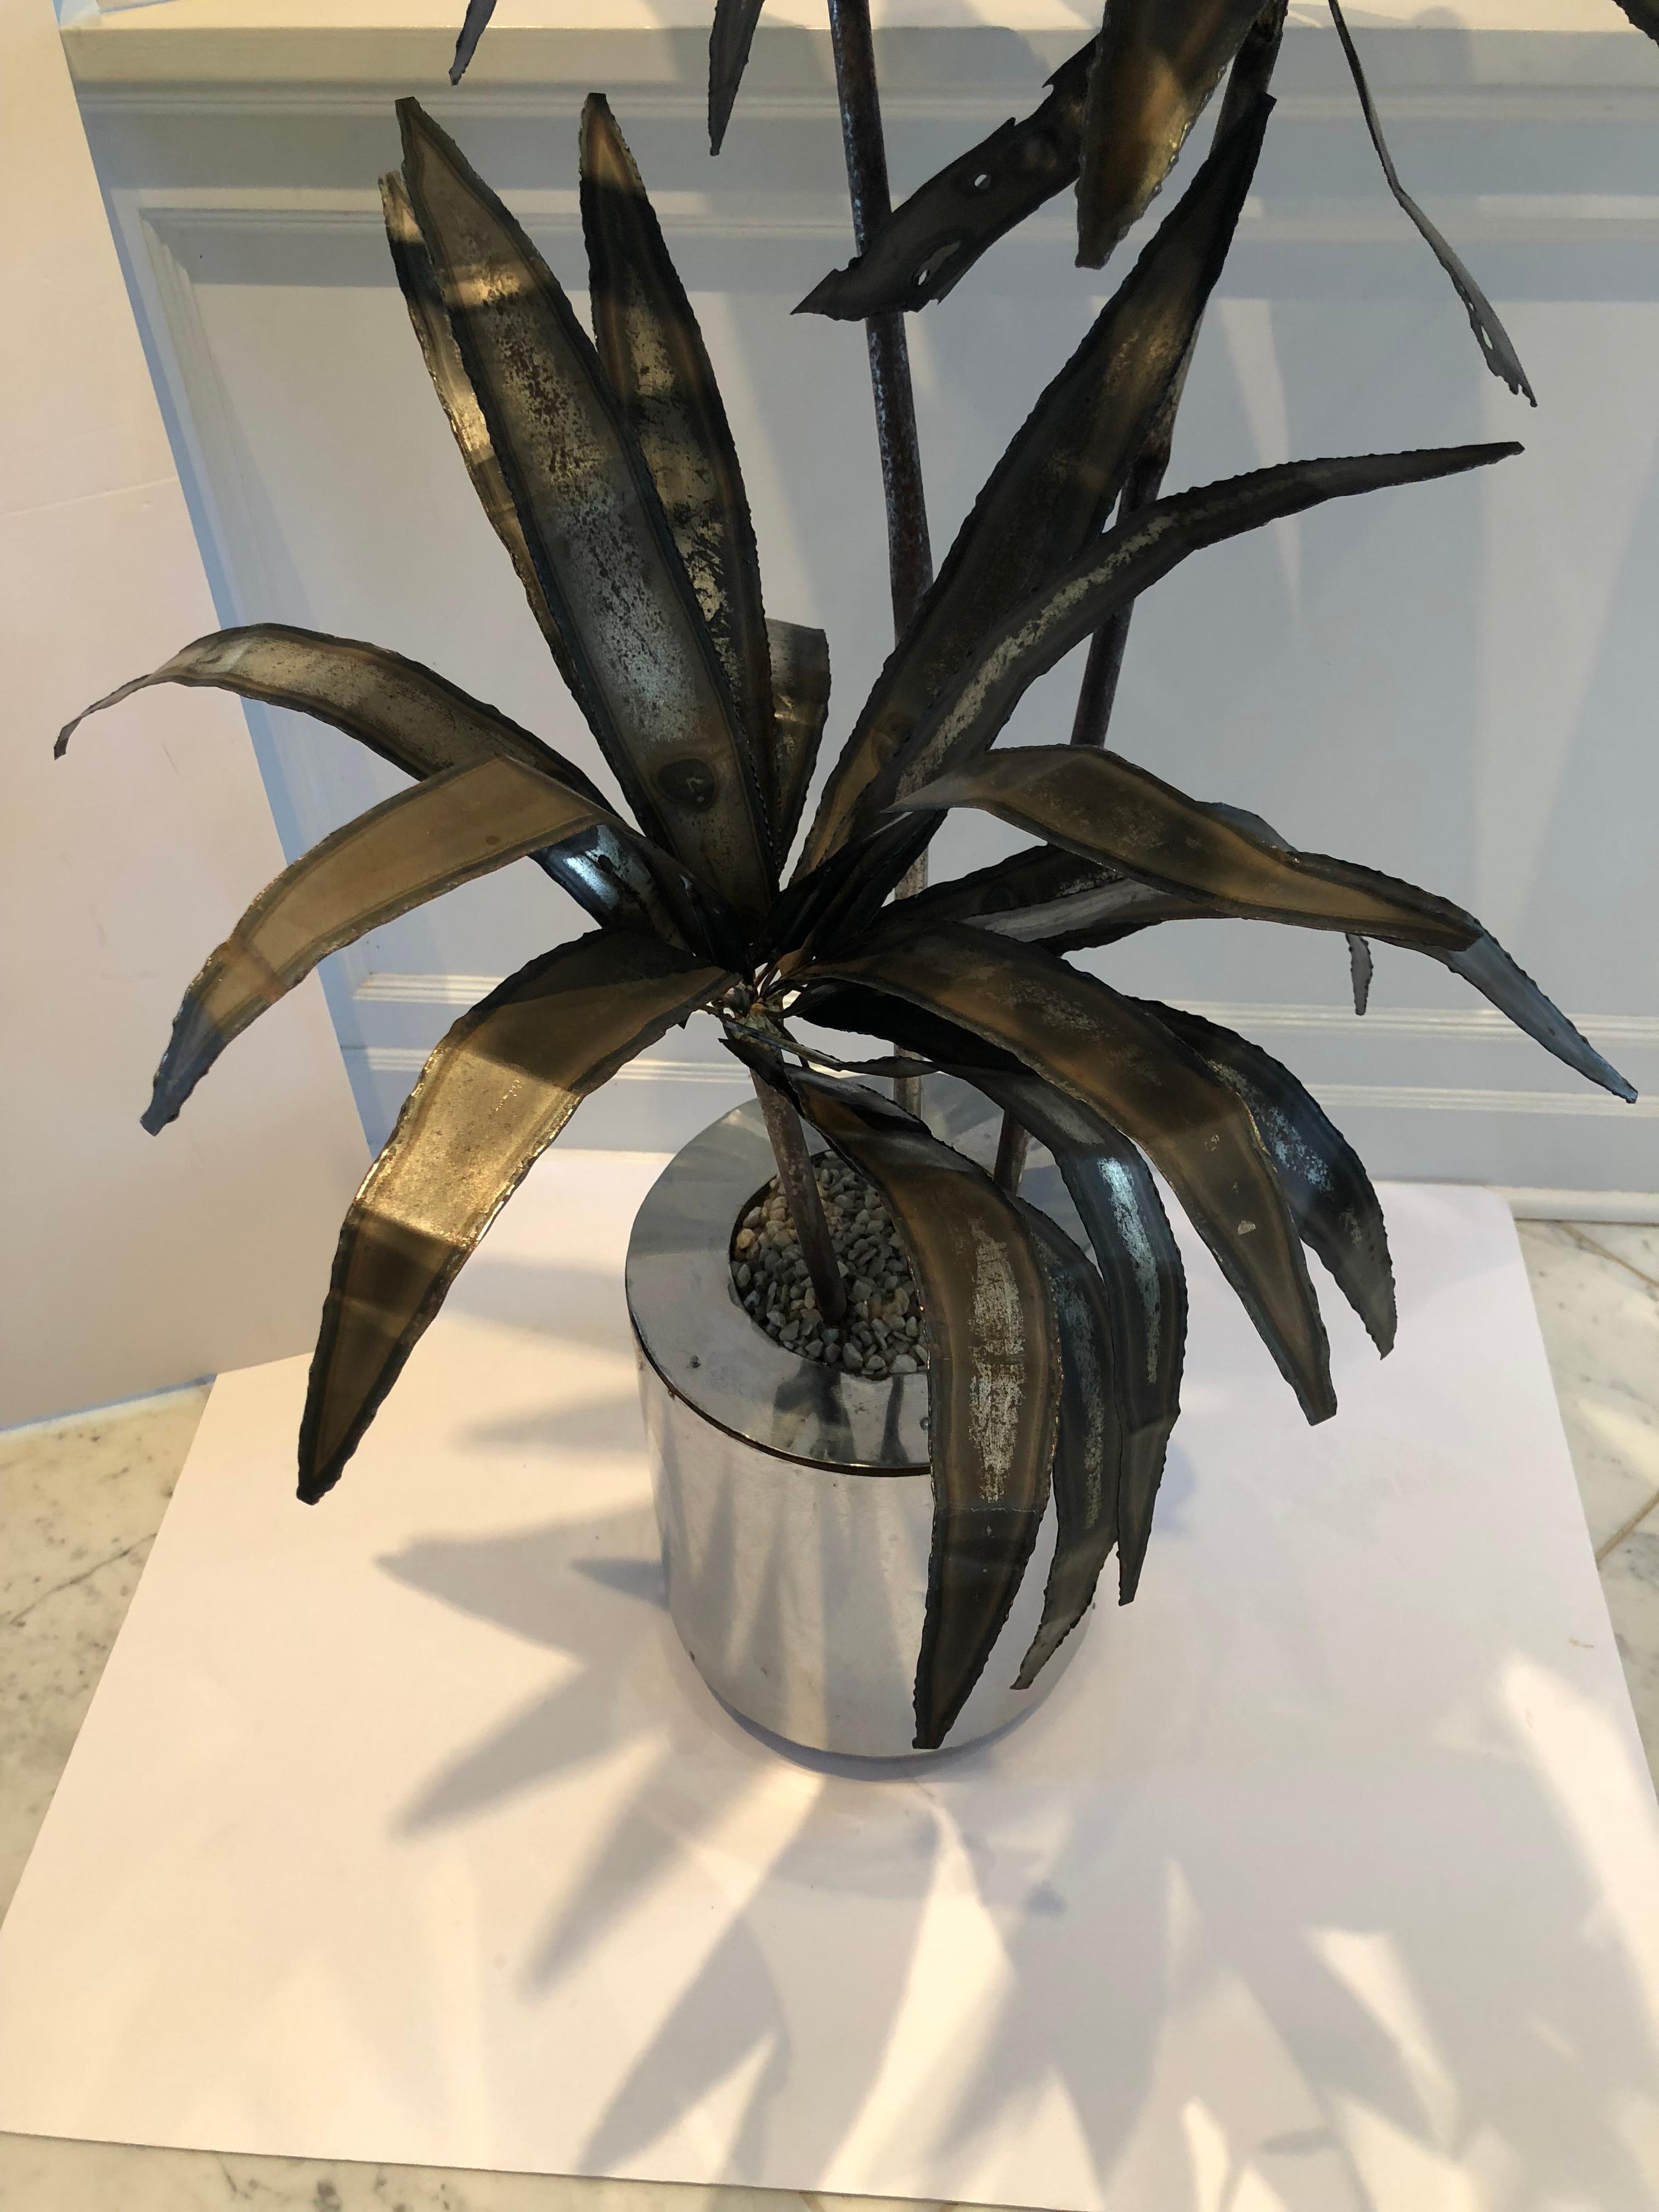 A very chic torch cut sculpture of a palm tree in a pot with pebbled mulch. Definitely midcentury, the sculpture has no signature although it is similar to others by Curtis Jere for Artisans house. The palm leaves are fabricated from pieces of metal